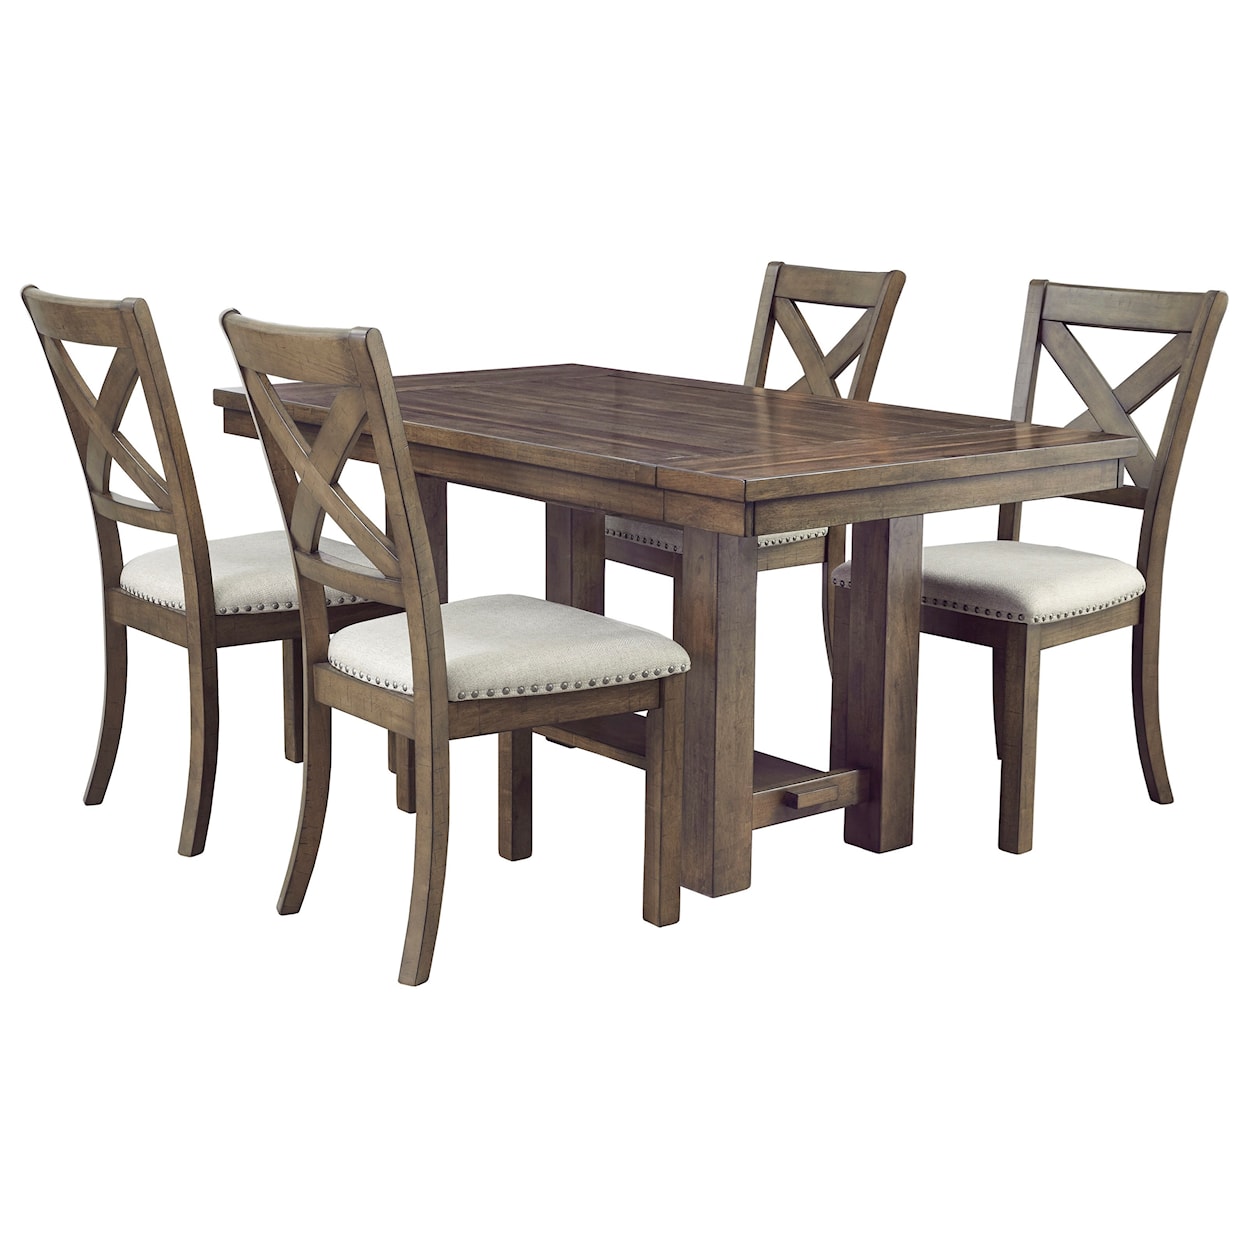 Michael Alan Select Moriville 5-Piece Table and Chair Set